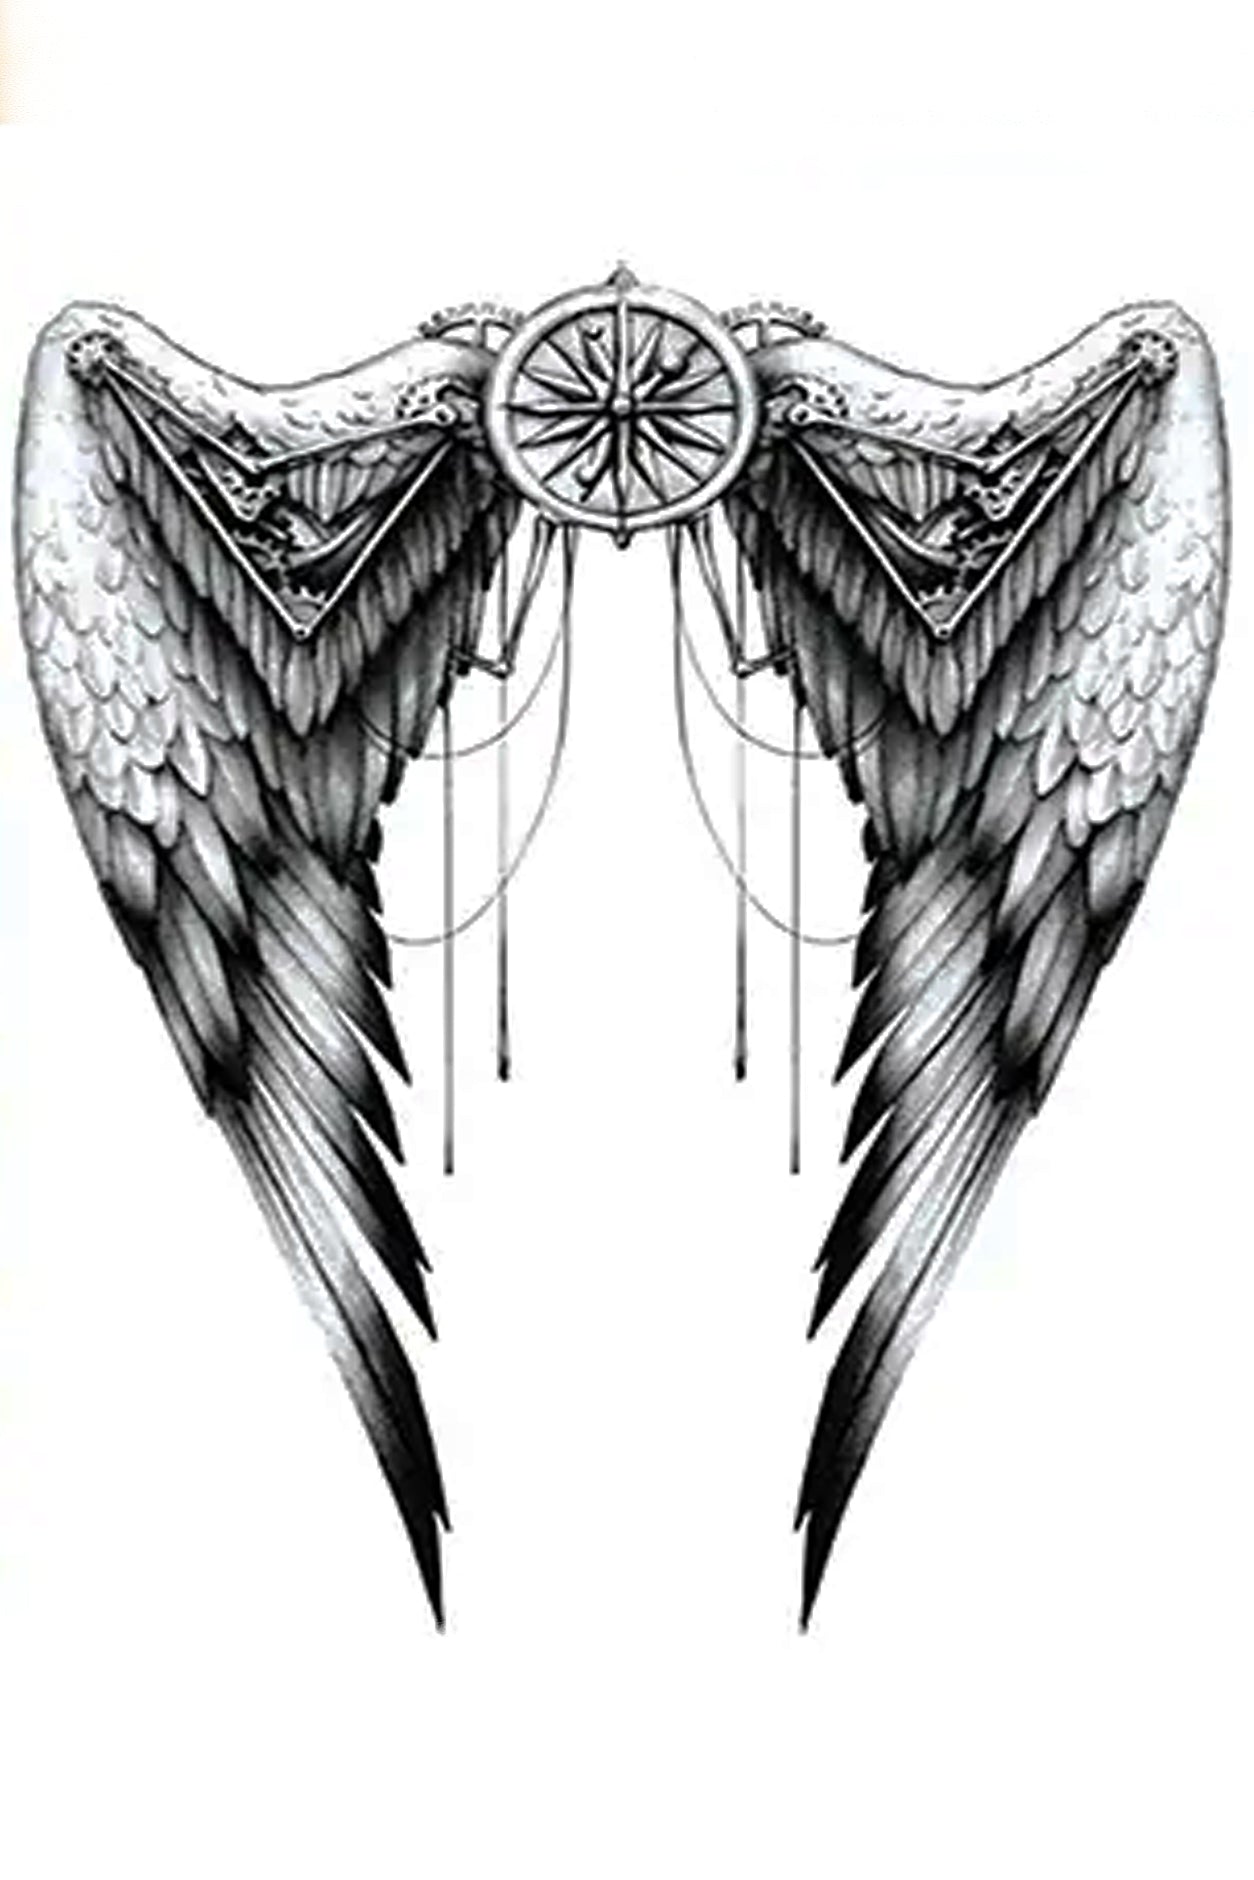 Angel wings symbolize protection and strength. The added gears in the wings of this spiritual design give it motion and freedom. The gears could also include a steampunk version creating an angelic mechanical impression. Feel free to display this exclusive tat on any part of your body and enjoy it for 7 to 12 days.